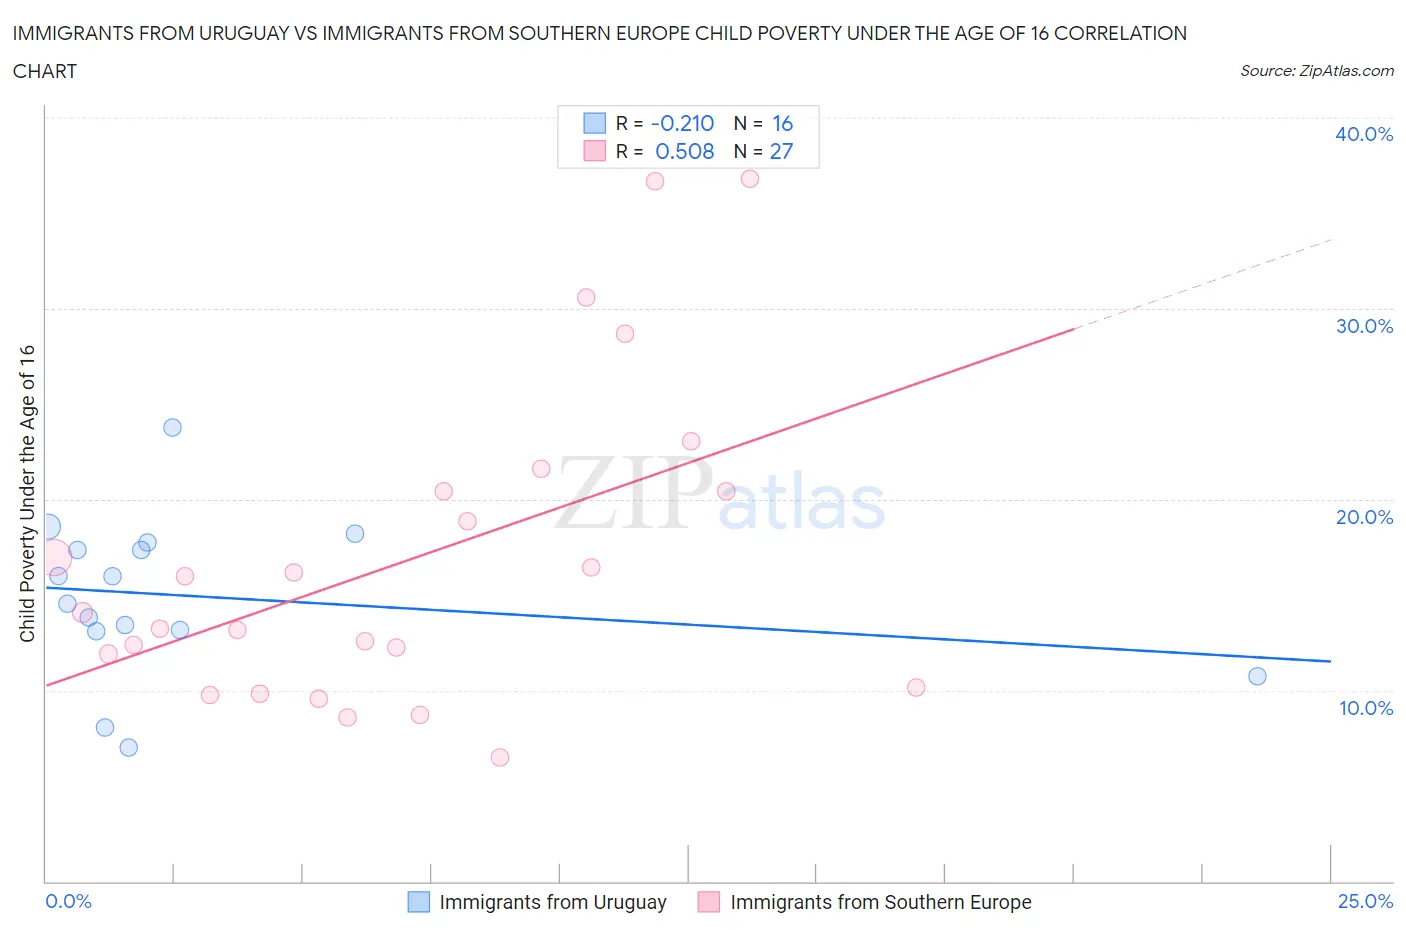 Immigrants from Uruguay vs Immigrants from Southern Europe Child Poverty Under the Age of 16